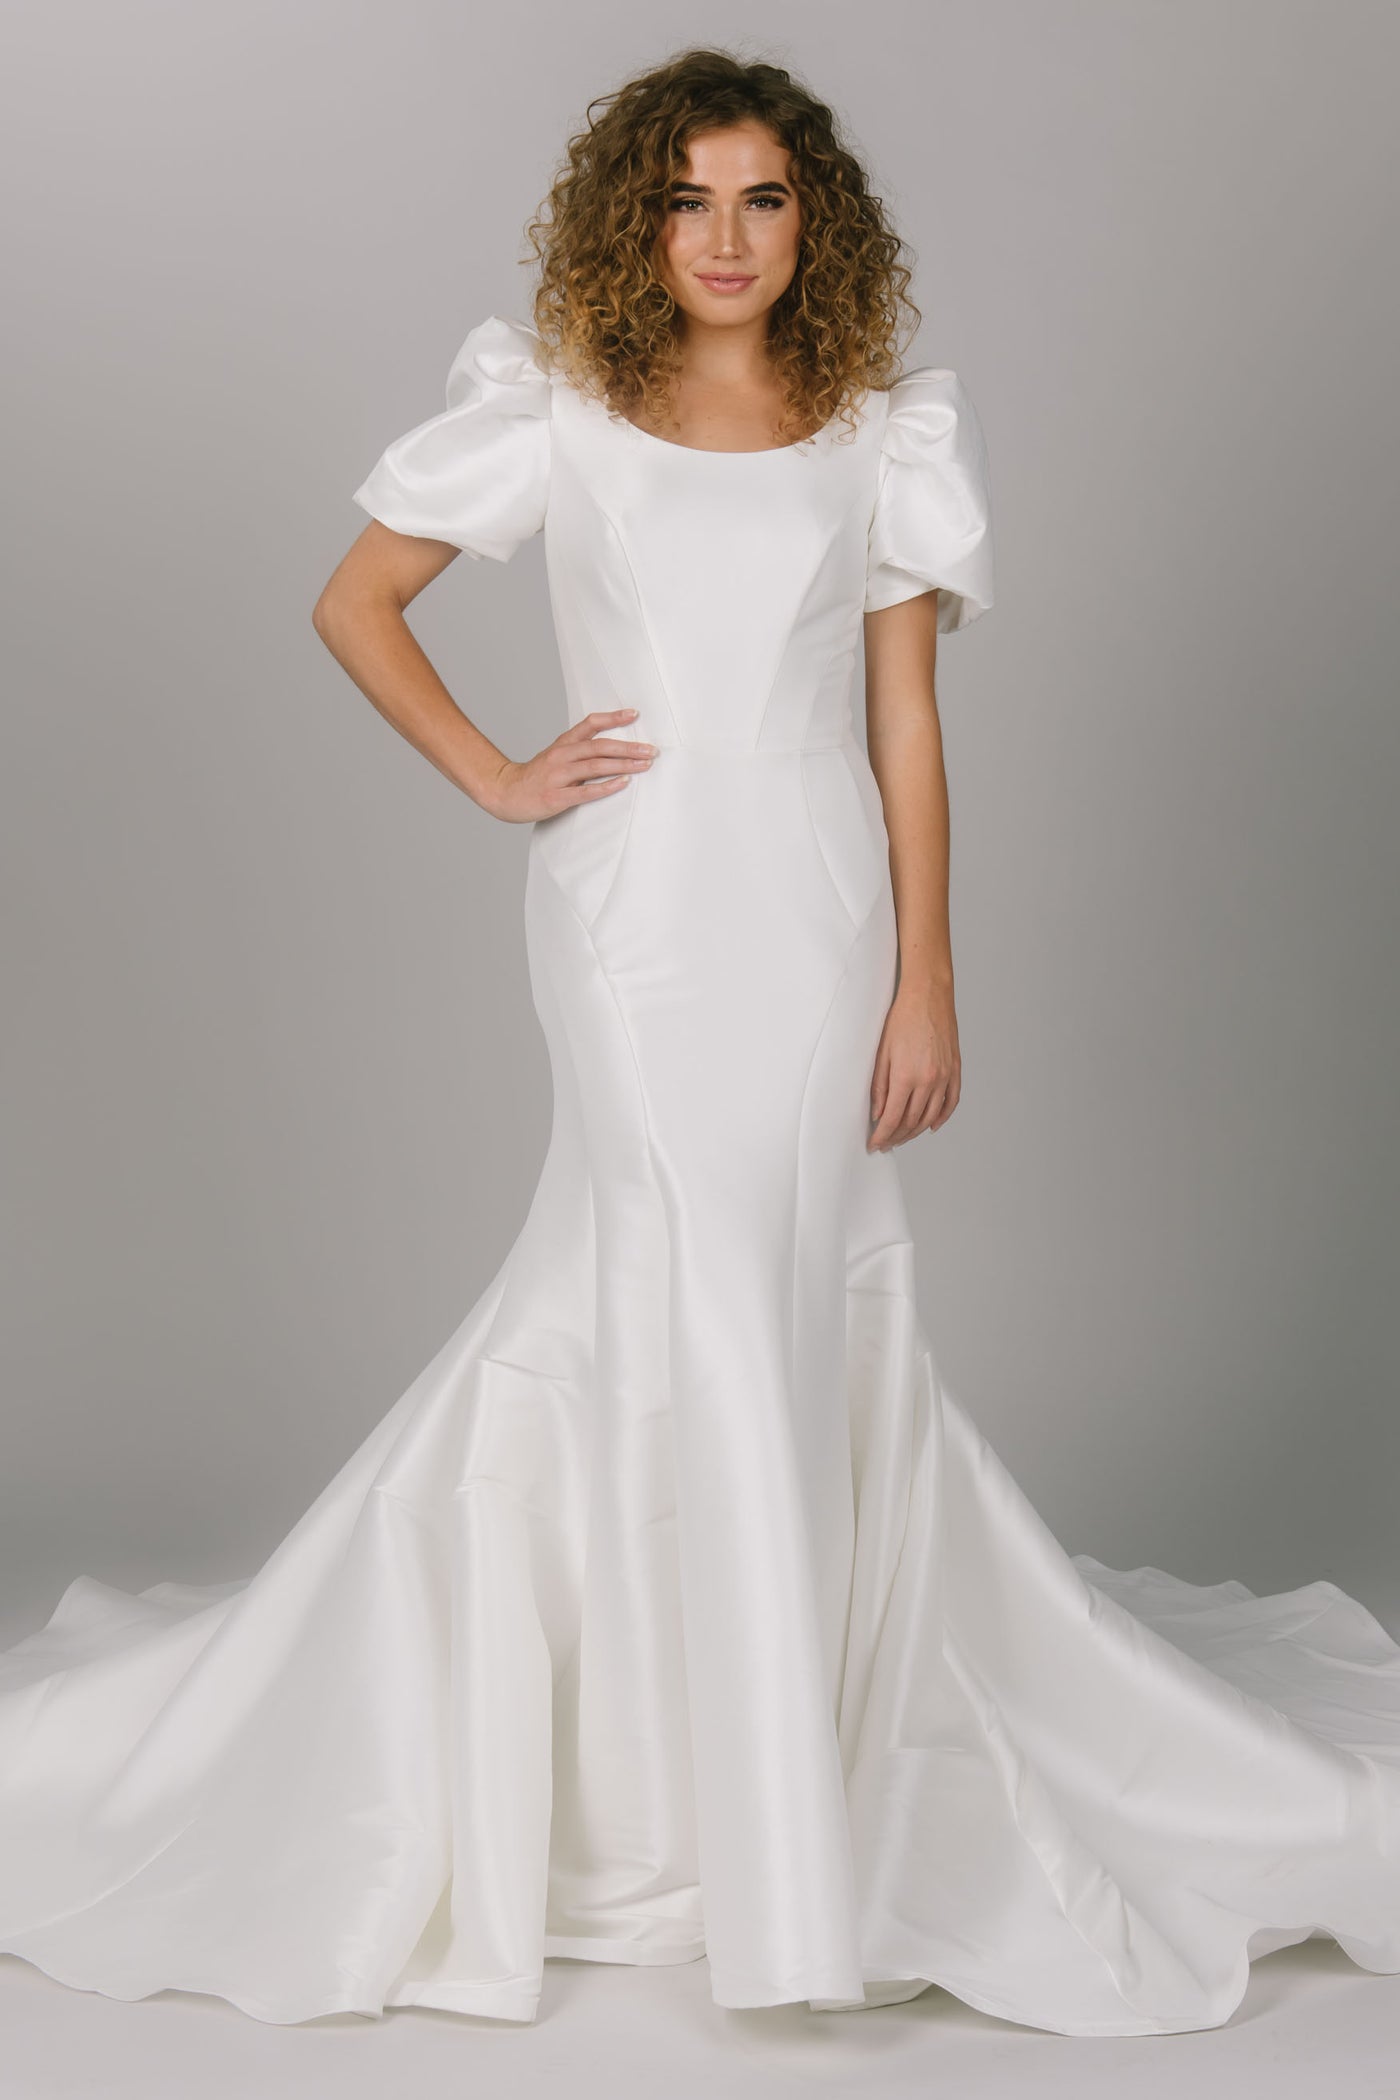 Front view of modest wedding dress with contour lines. It is a fitted dress with puffed sleeves. This dress has a scoop neckline and is a gorgeous modest wedding gown. 